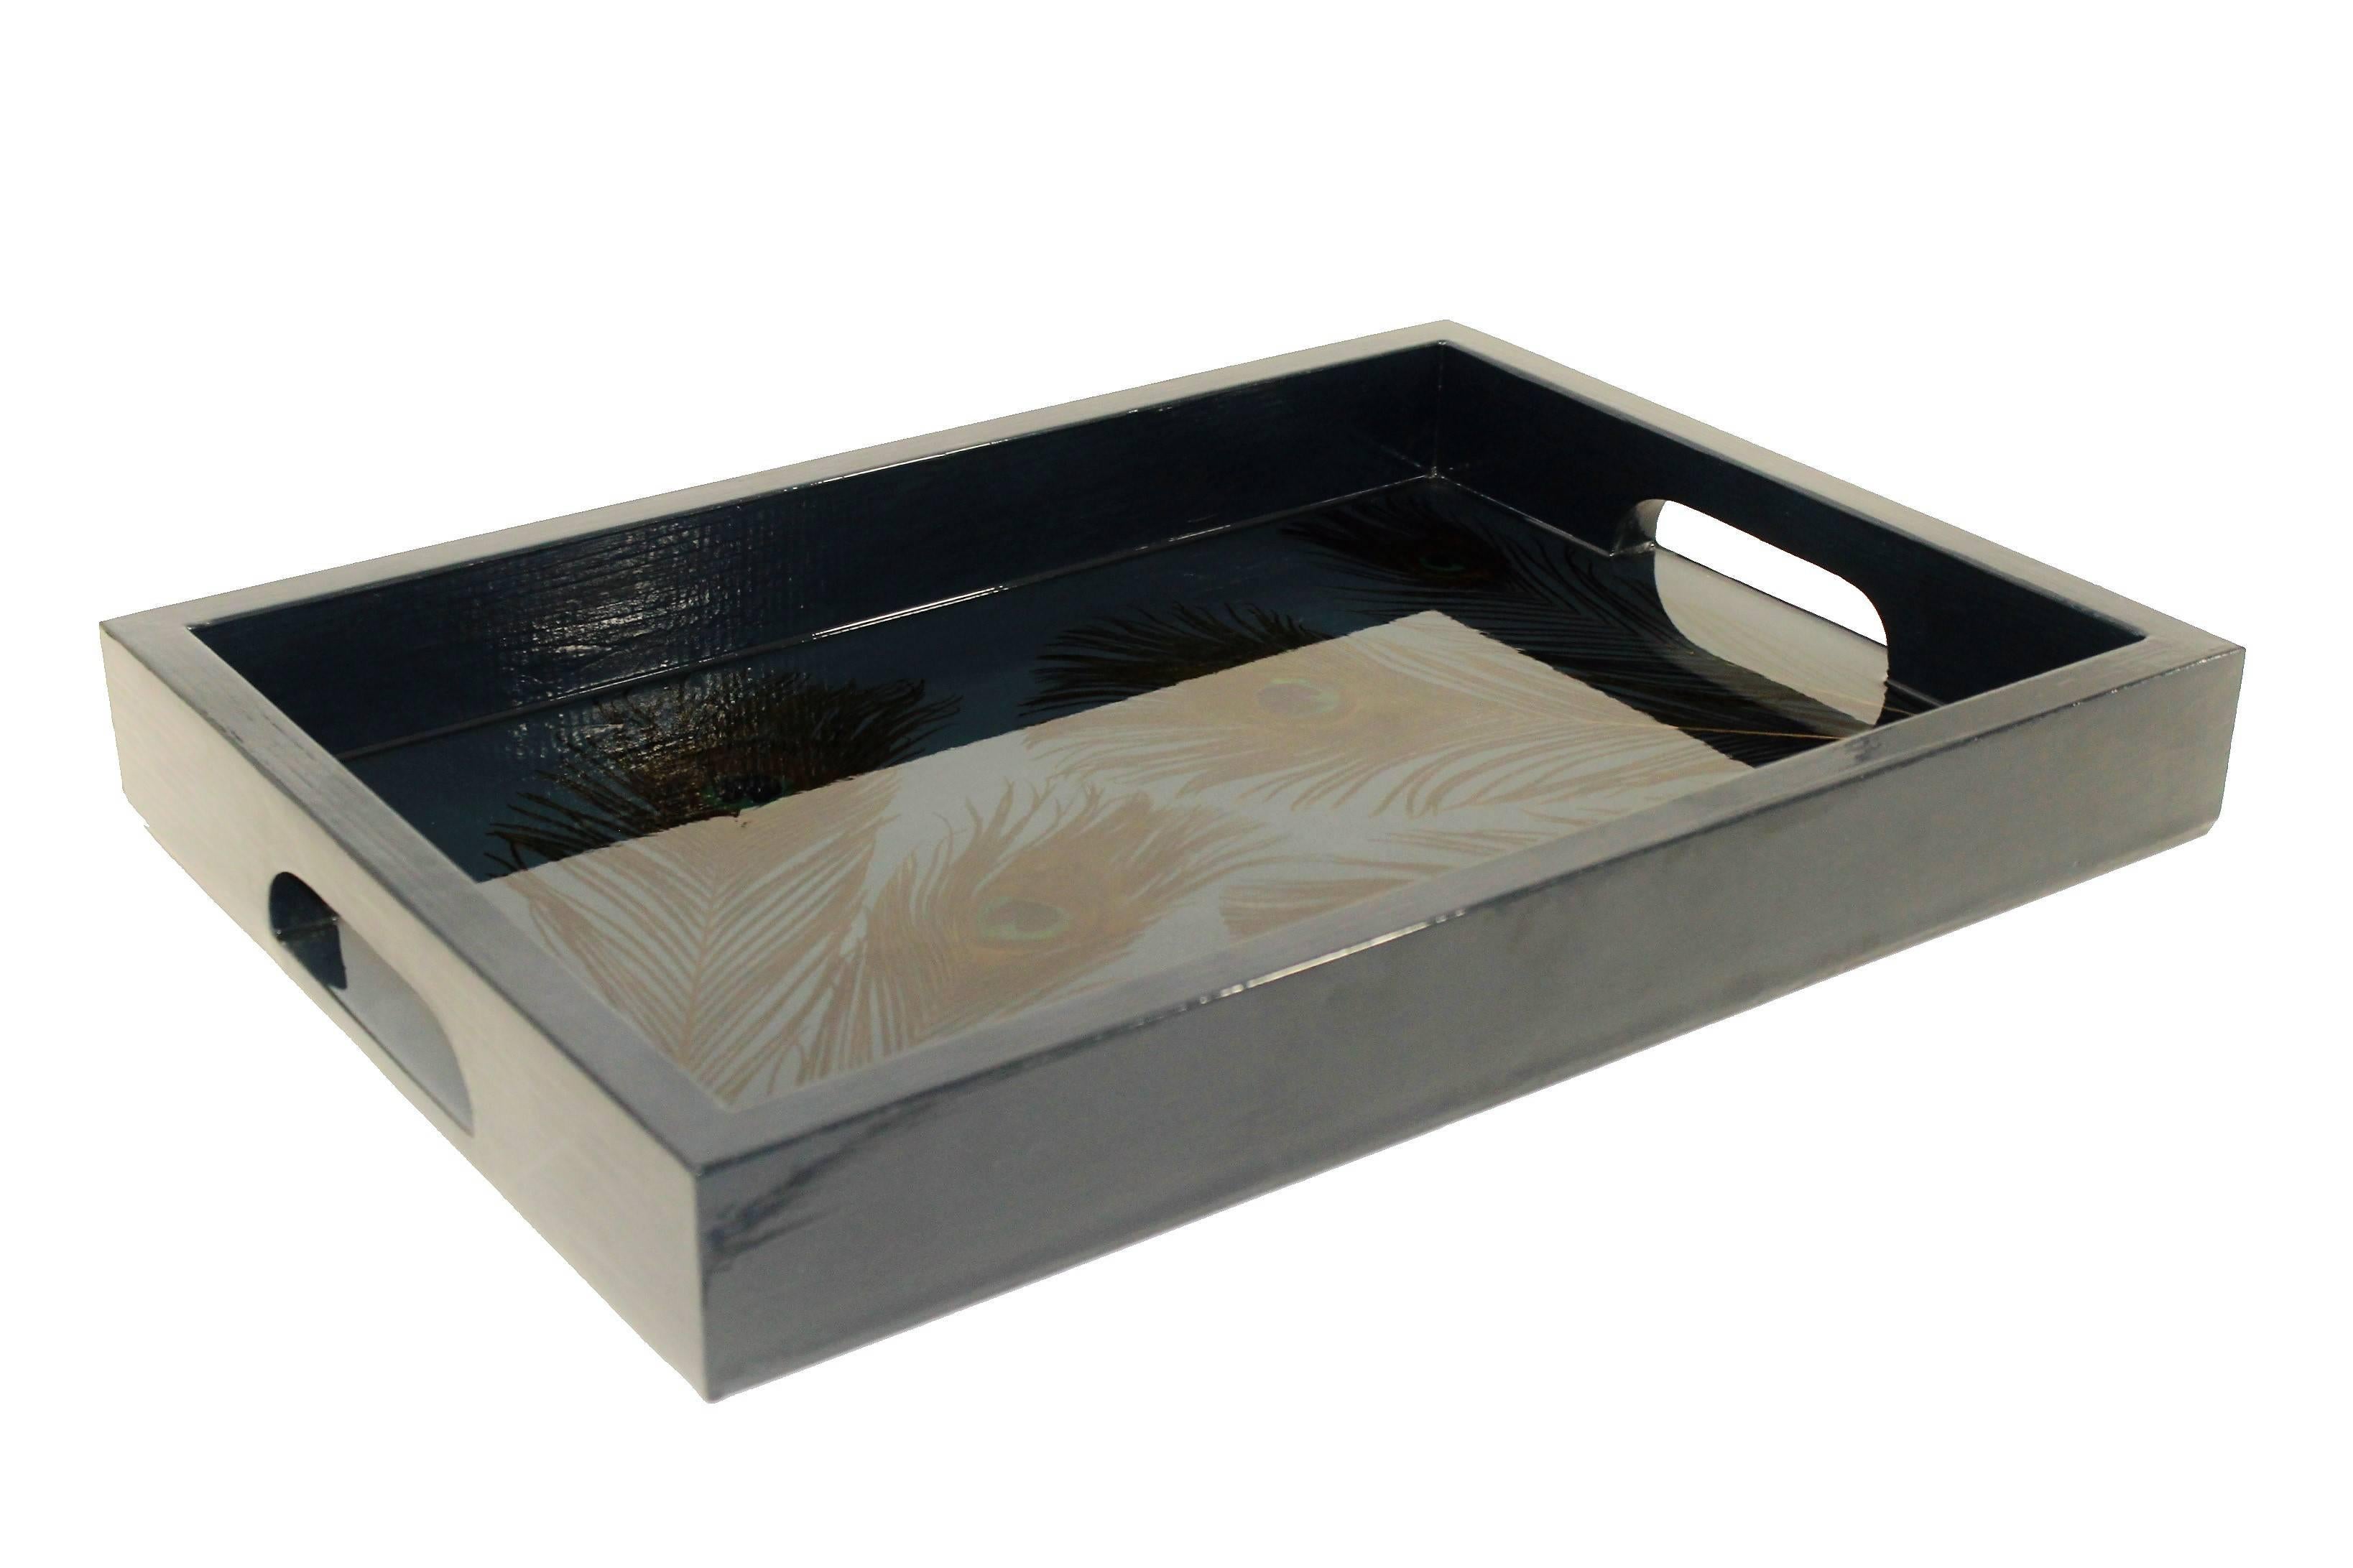 Unique colored wooden resin tray, part of Viscosity Art & Resin Gallery home decor collection. Peacock feathers are embedded in clear resin resulting in this one of a kind modern tray. A piece of art that will give character and elegance in any